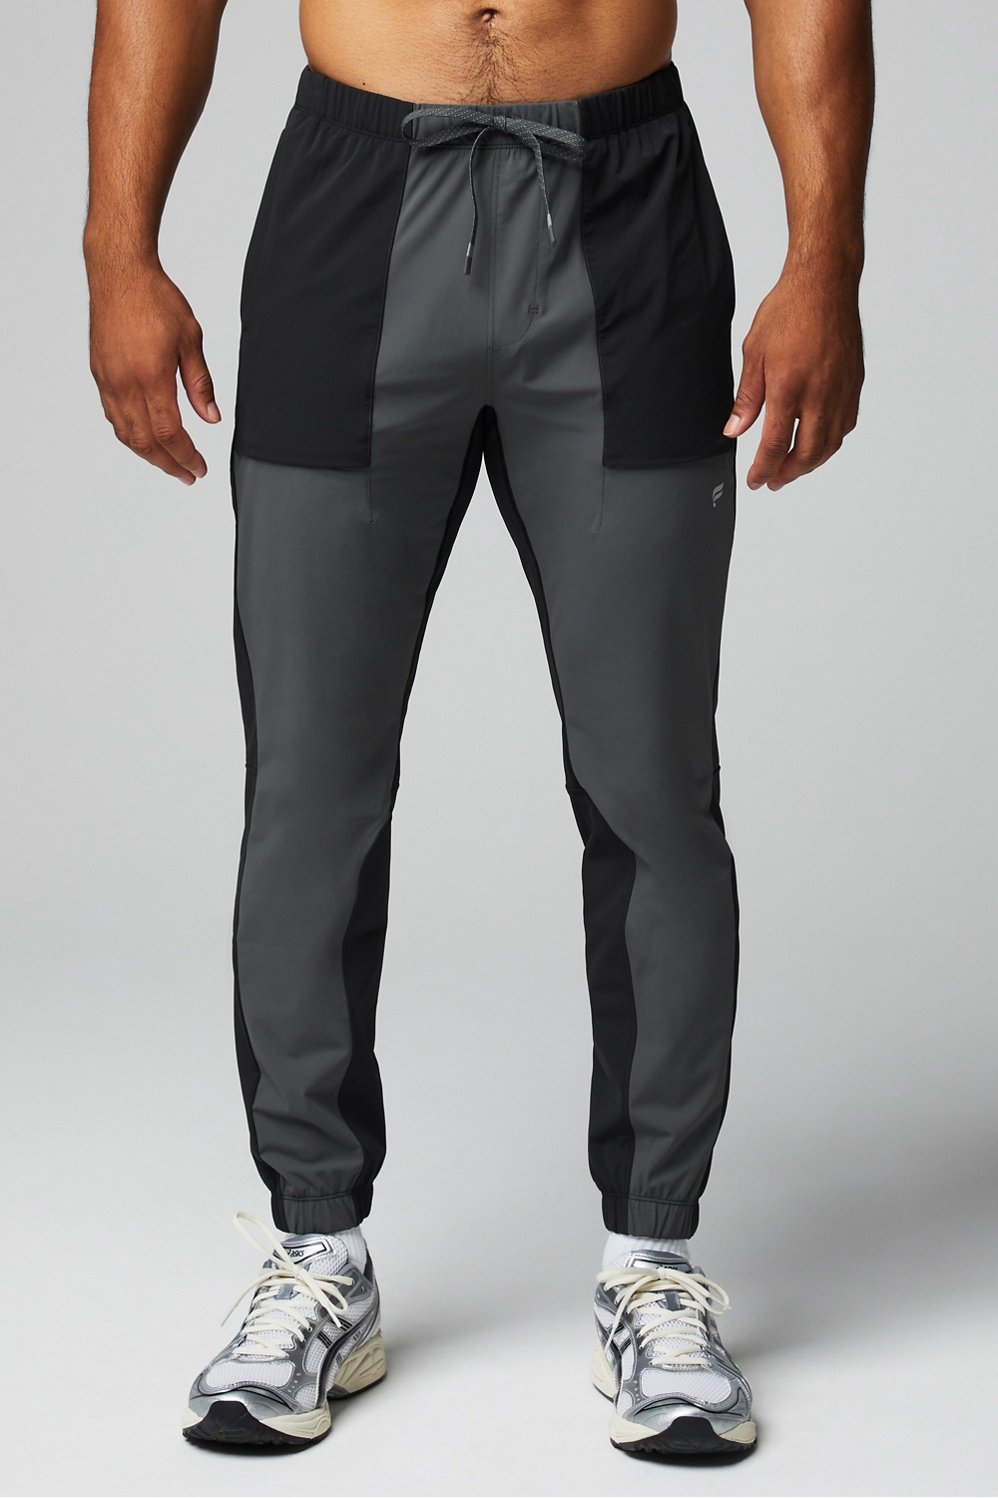 The One Jogger - Women'S - Fabletics